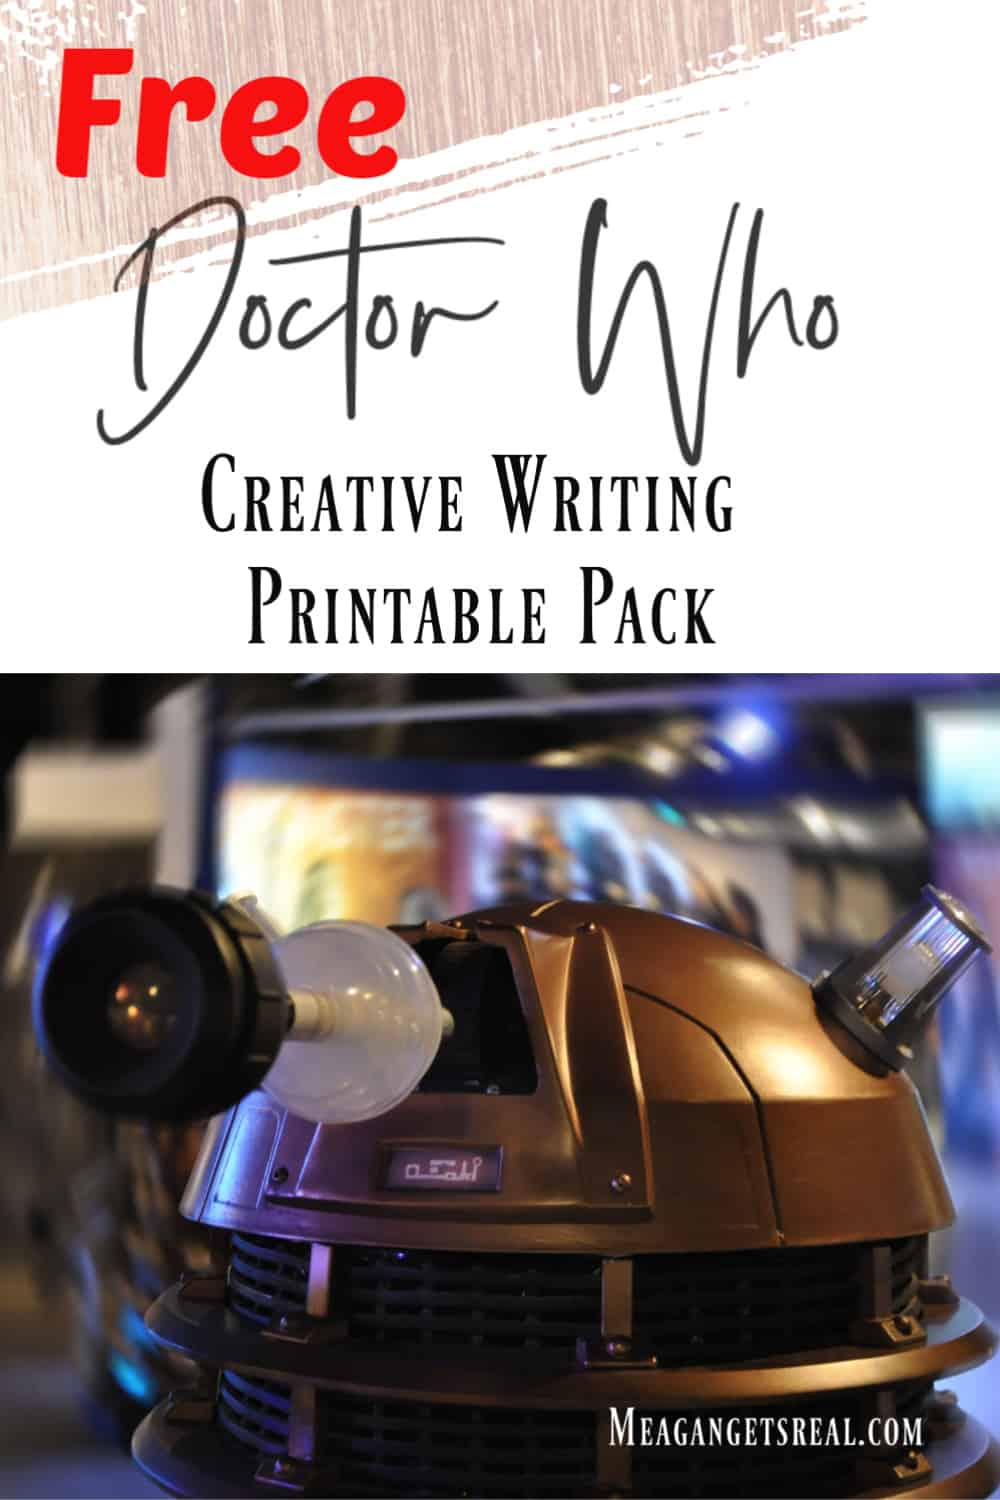 Are you working on creative writing with a whovian this year? Don't miss these Doctor Who Inspired writing printable pages!